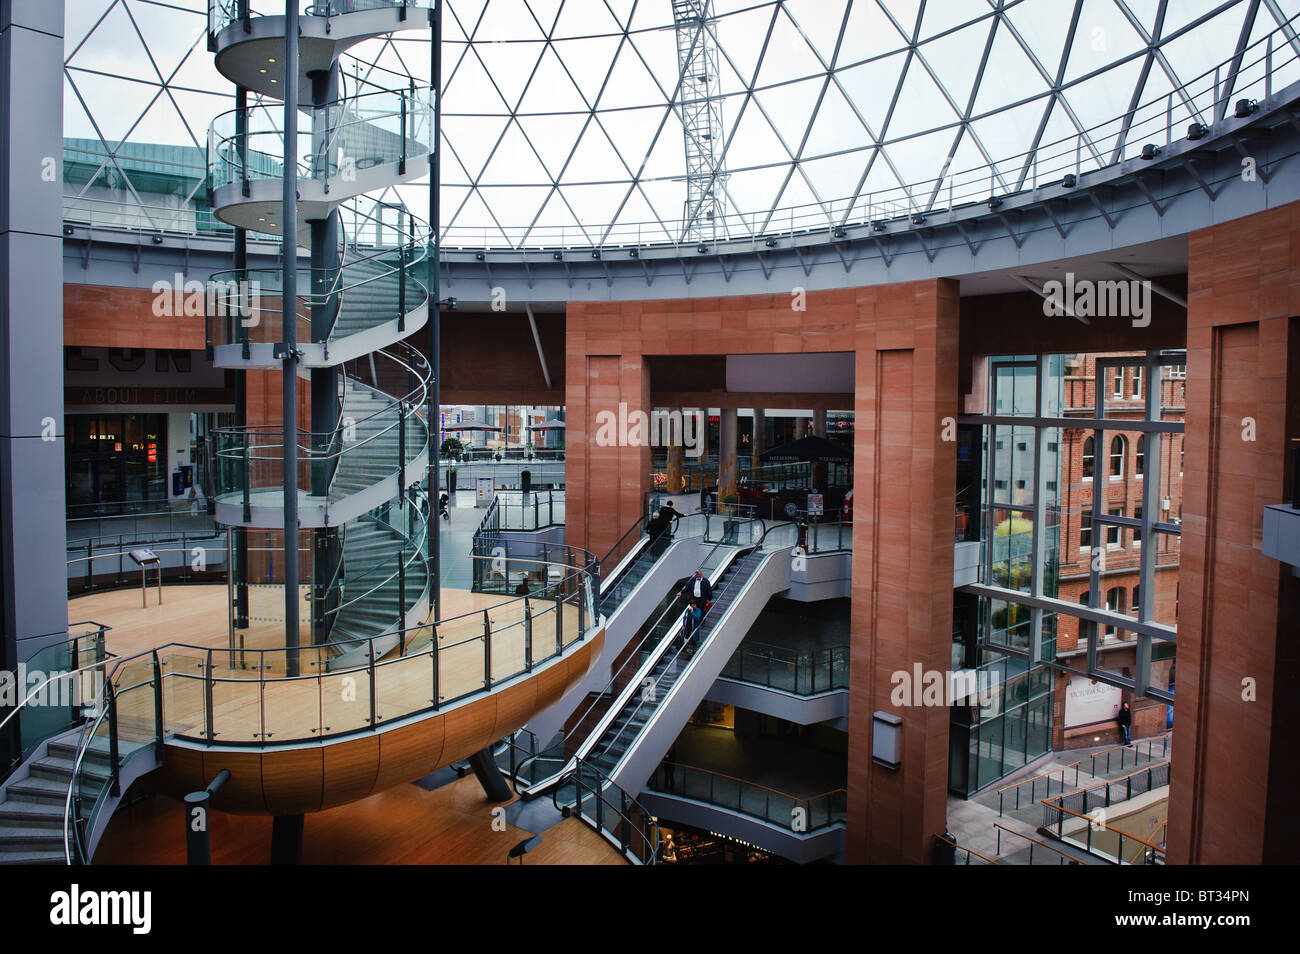 The award winning Victoria Square shopping centre in Belfast, Northern Ireland Stock Photo